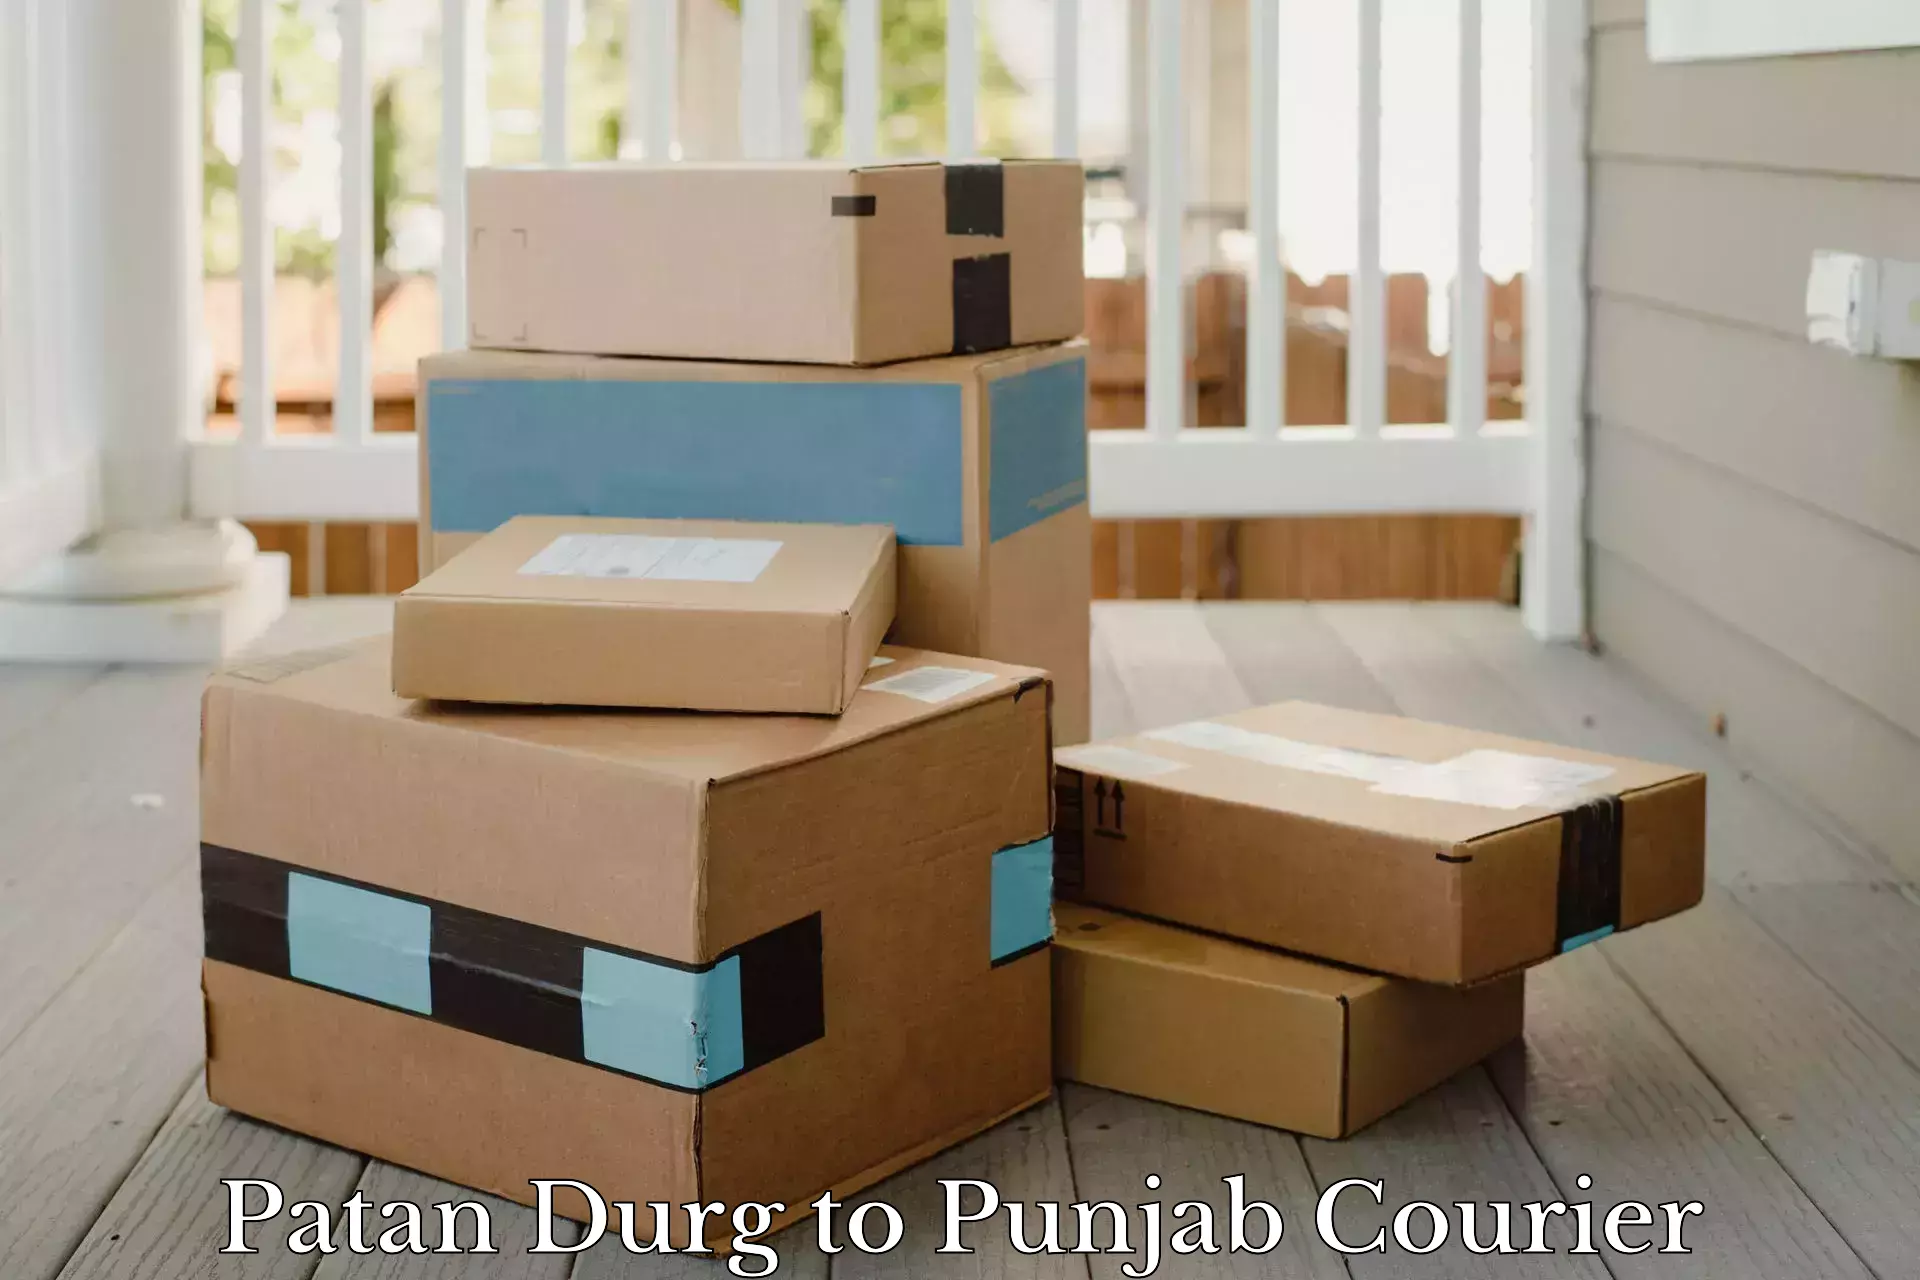 Cash on delivery service in Patan Durg to Central University of Punjab Bathinda